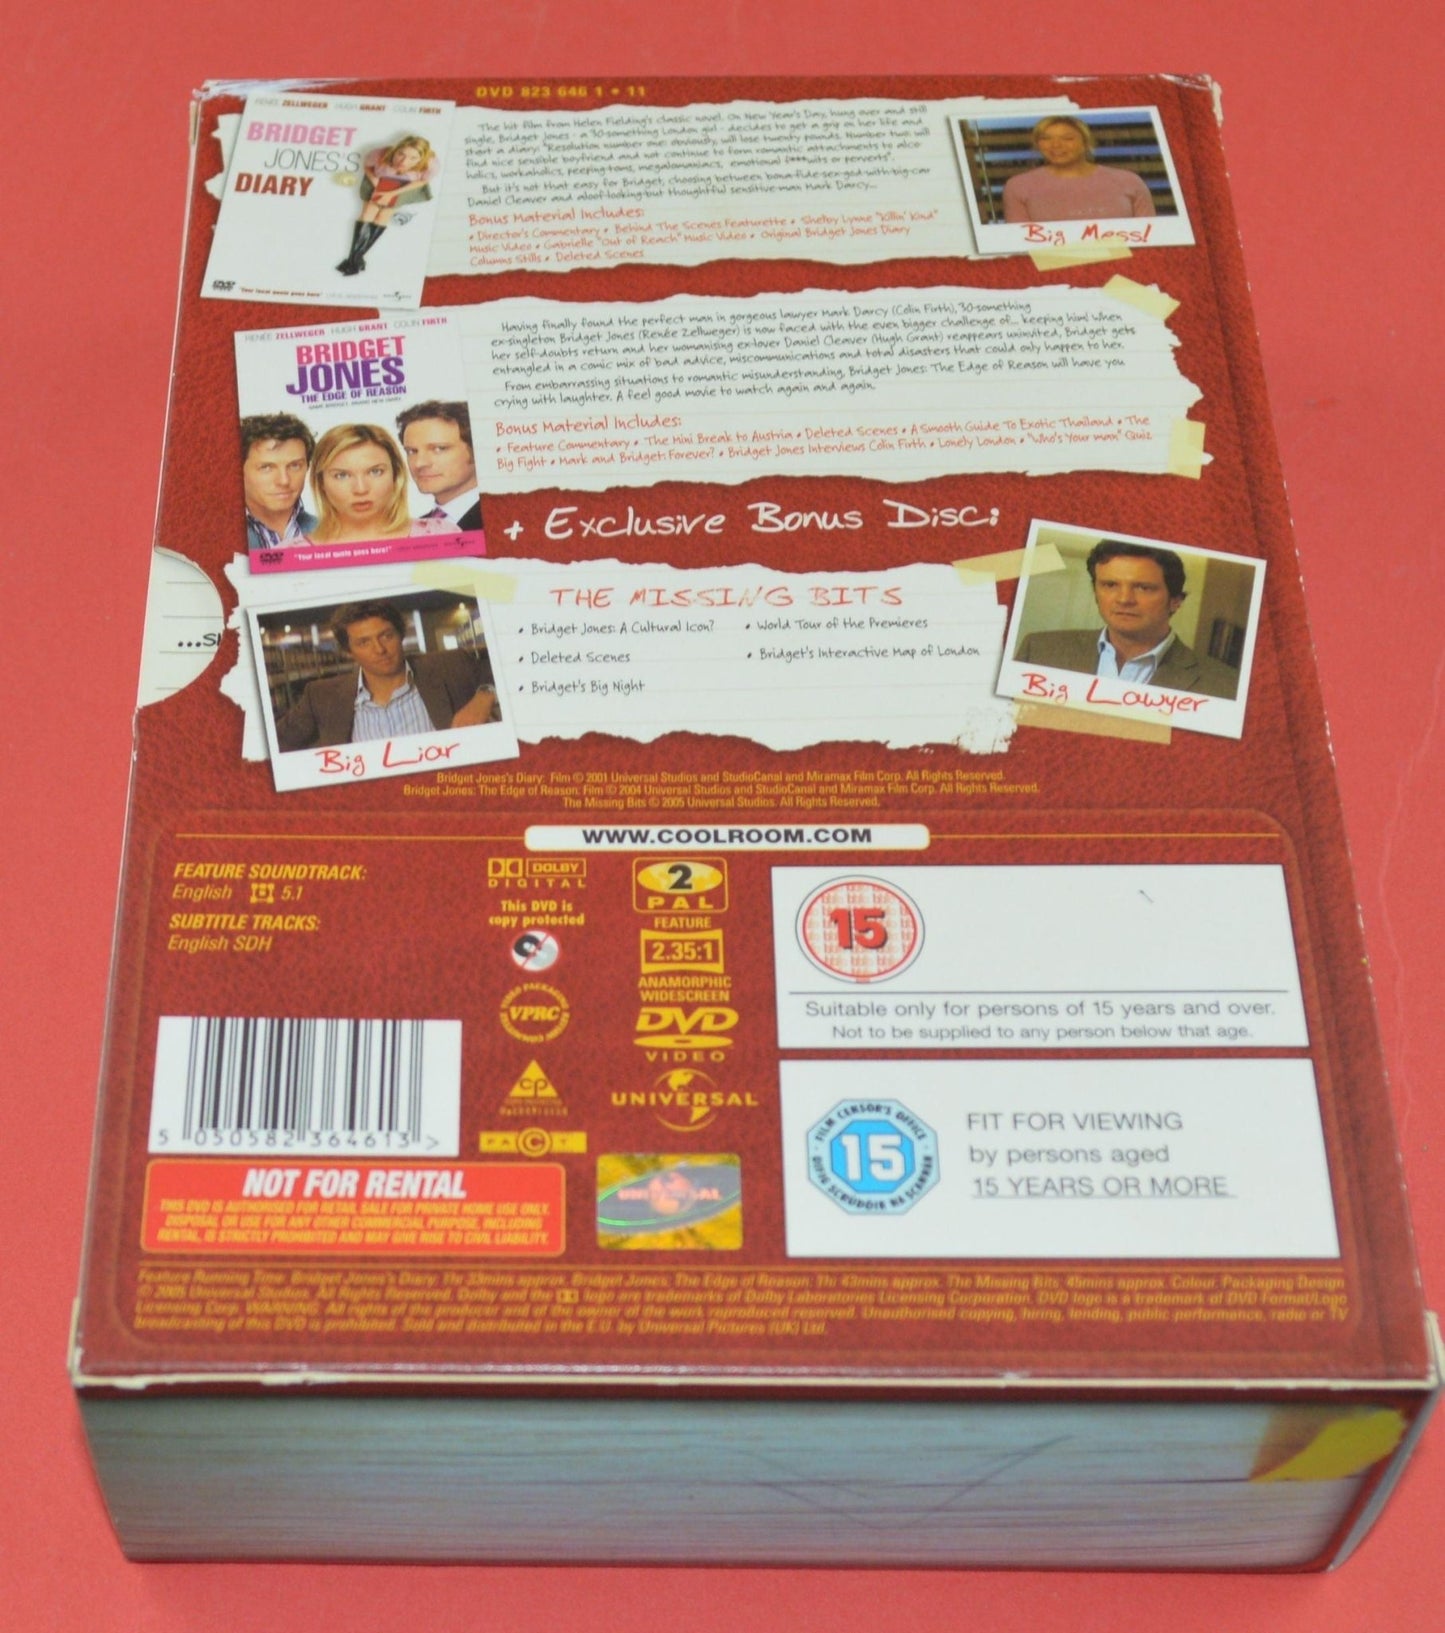 DVD COLLECTION 3 DISC SET BRIDGET DIARIES(PREVIOUSLY OWNED)GOOD CONDITION - TMD167207